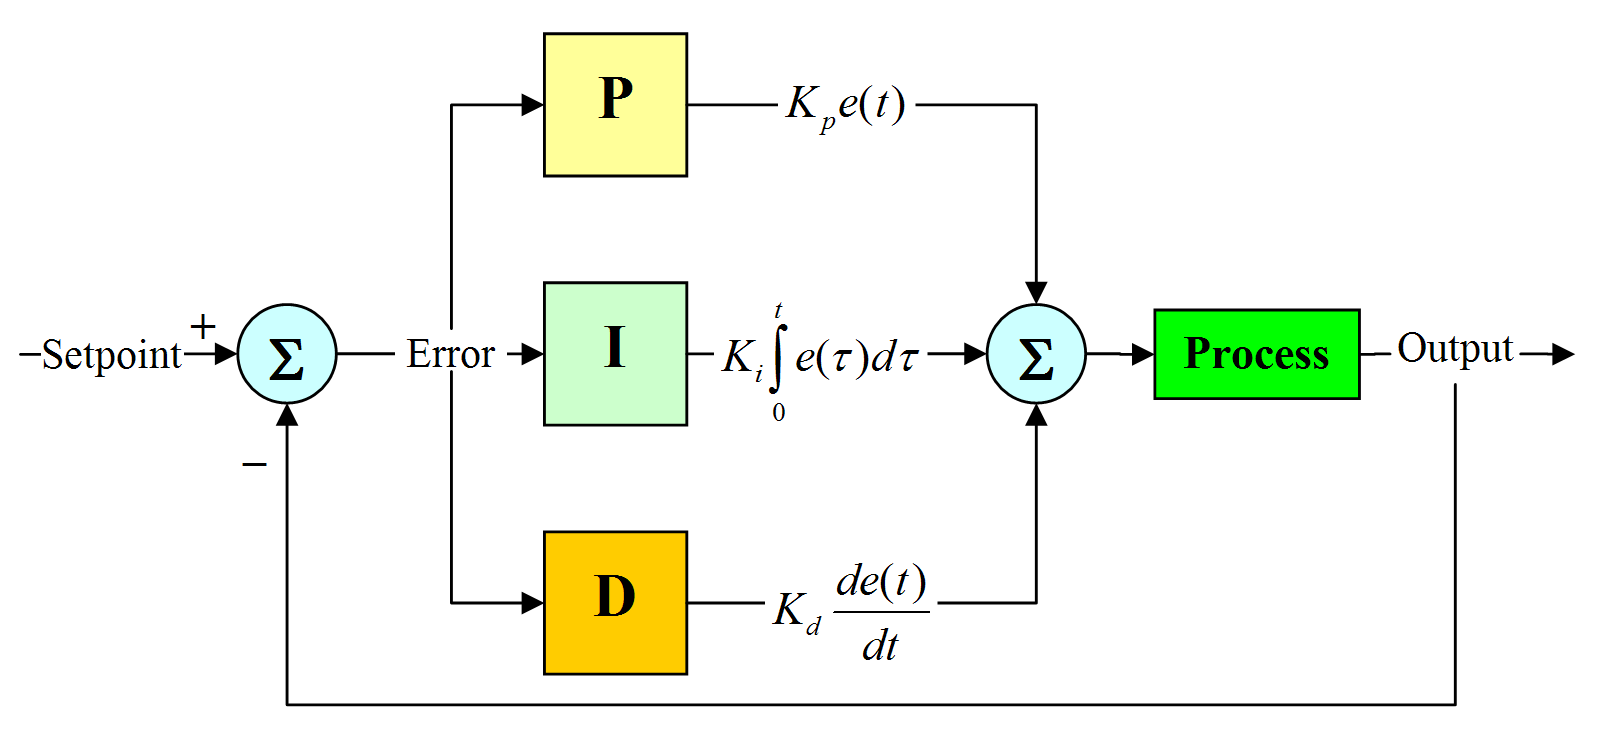 A continuous-time PID control loop